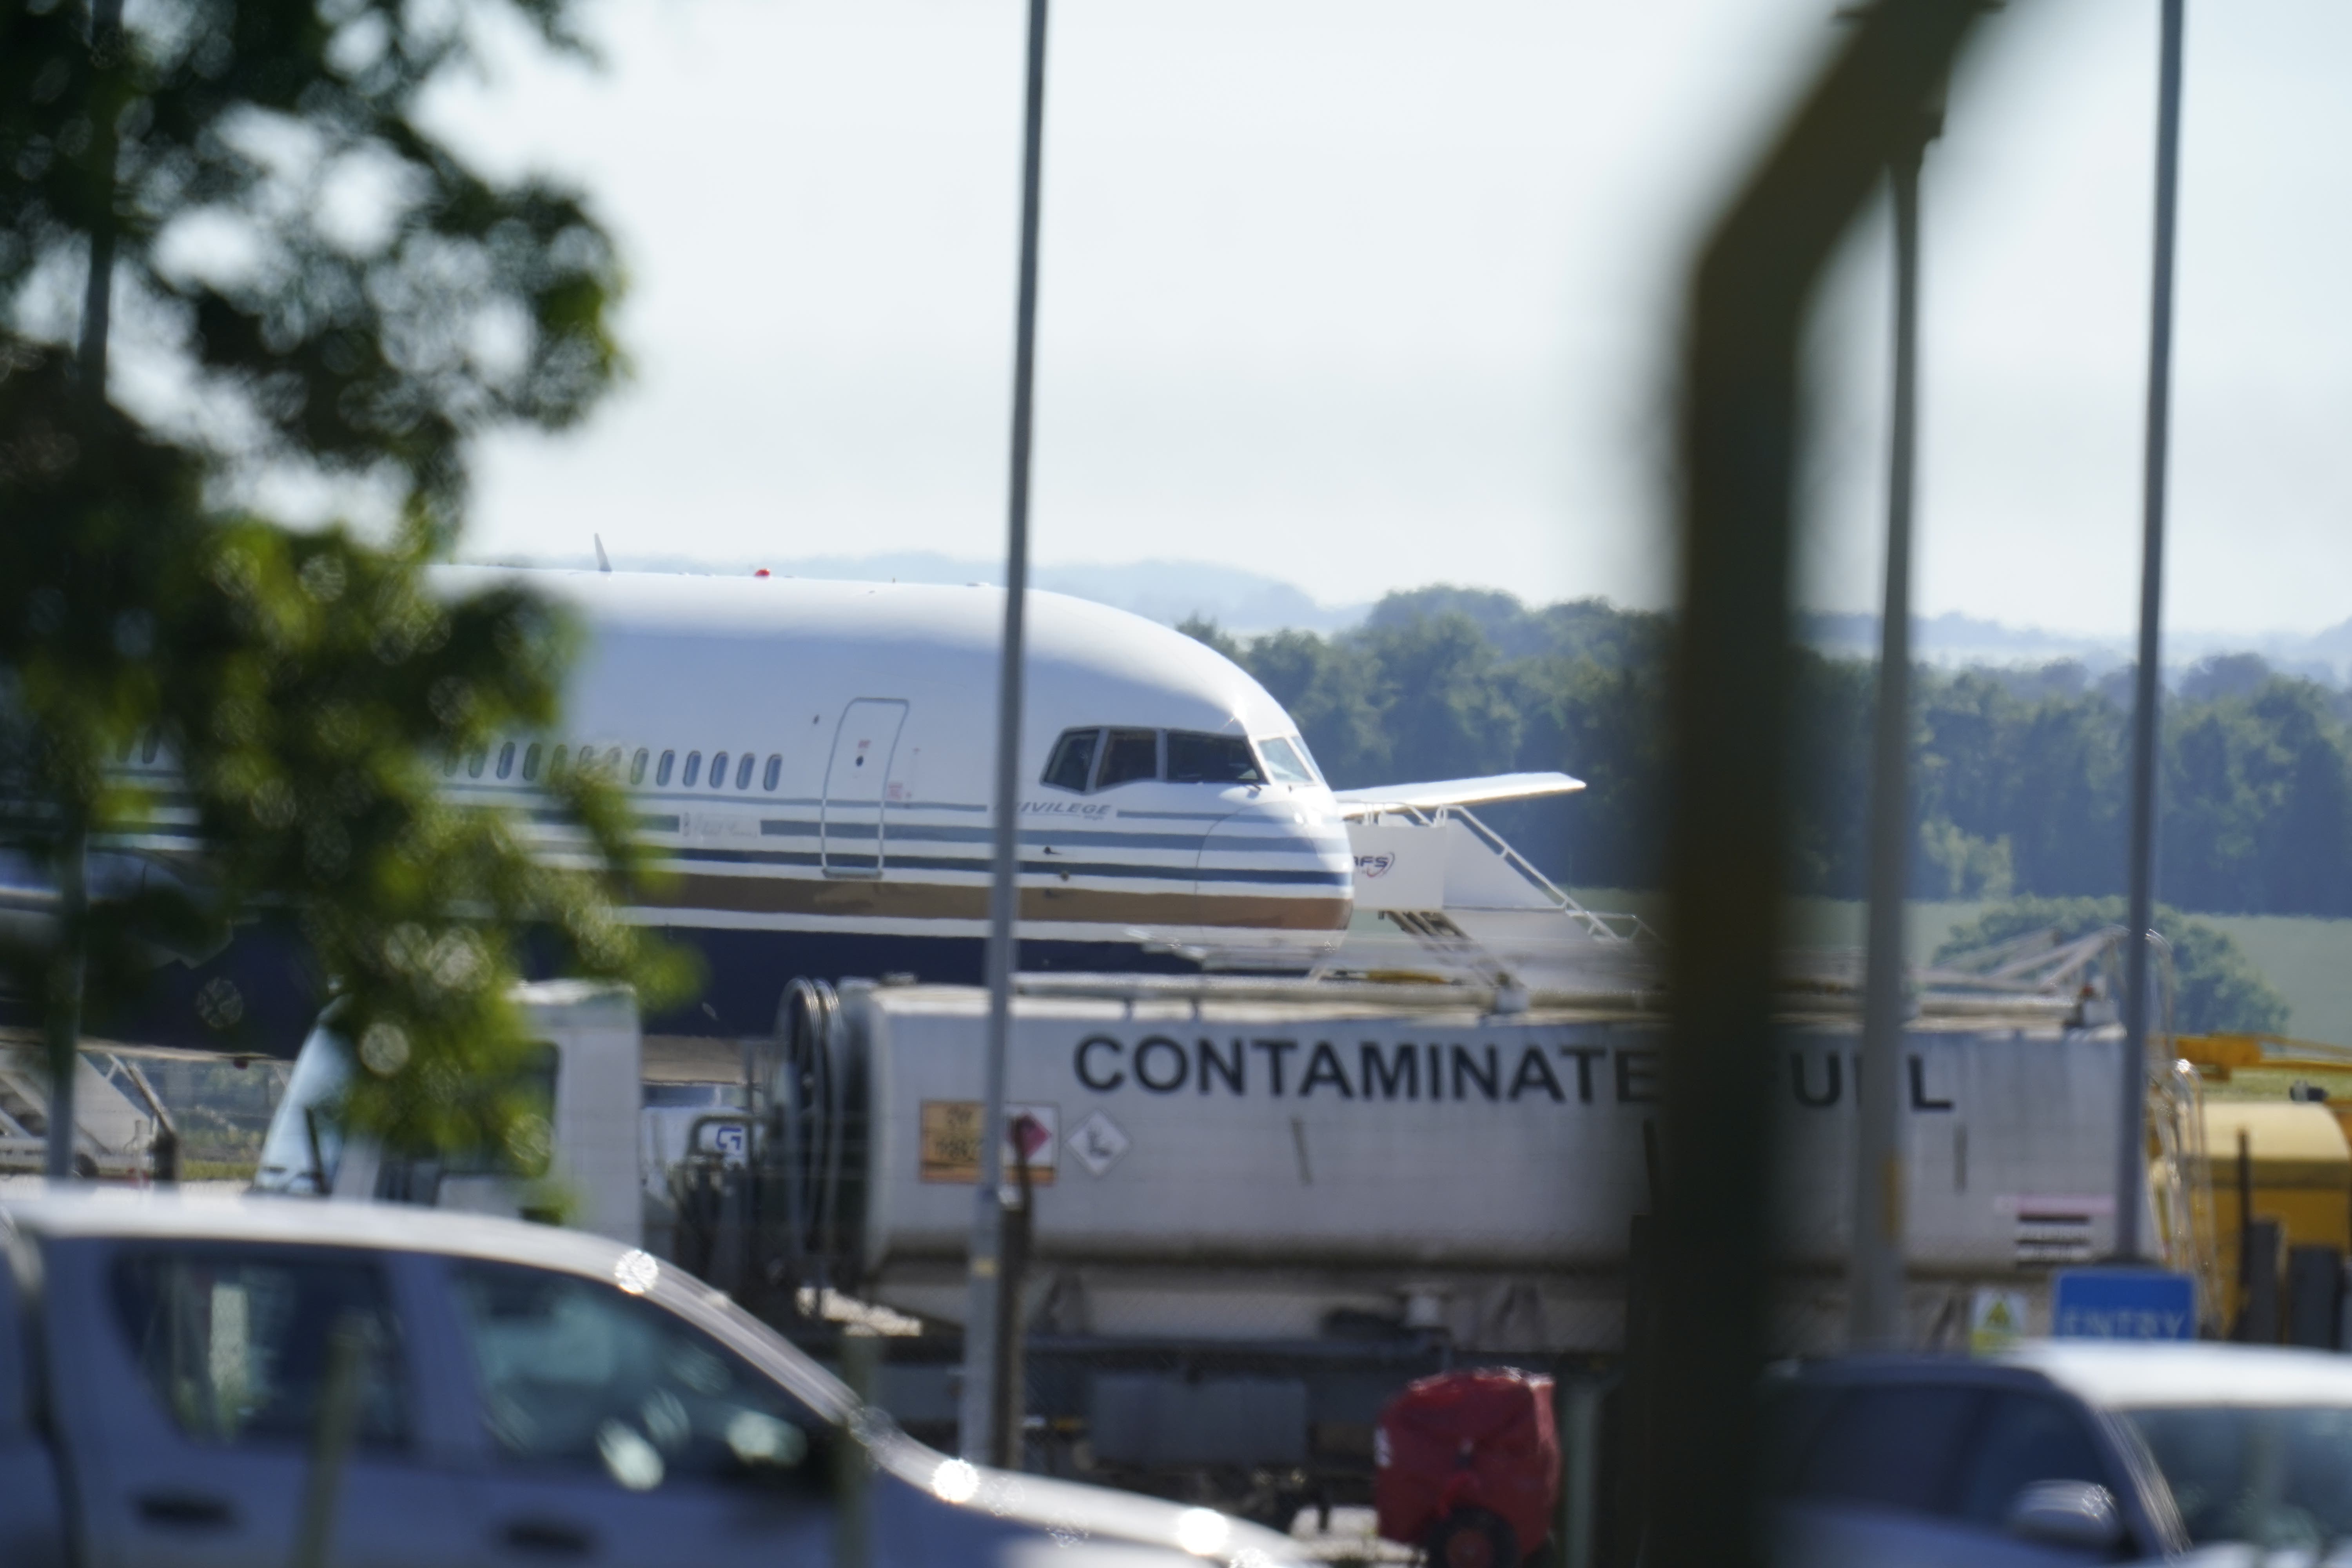 A Boeing 767 aircraft pictured at MoD Boscombe Down, near Salisbury, which was set to take asylum seekers from the UK to Rwanda in 2022